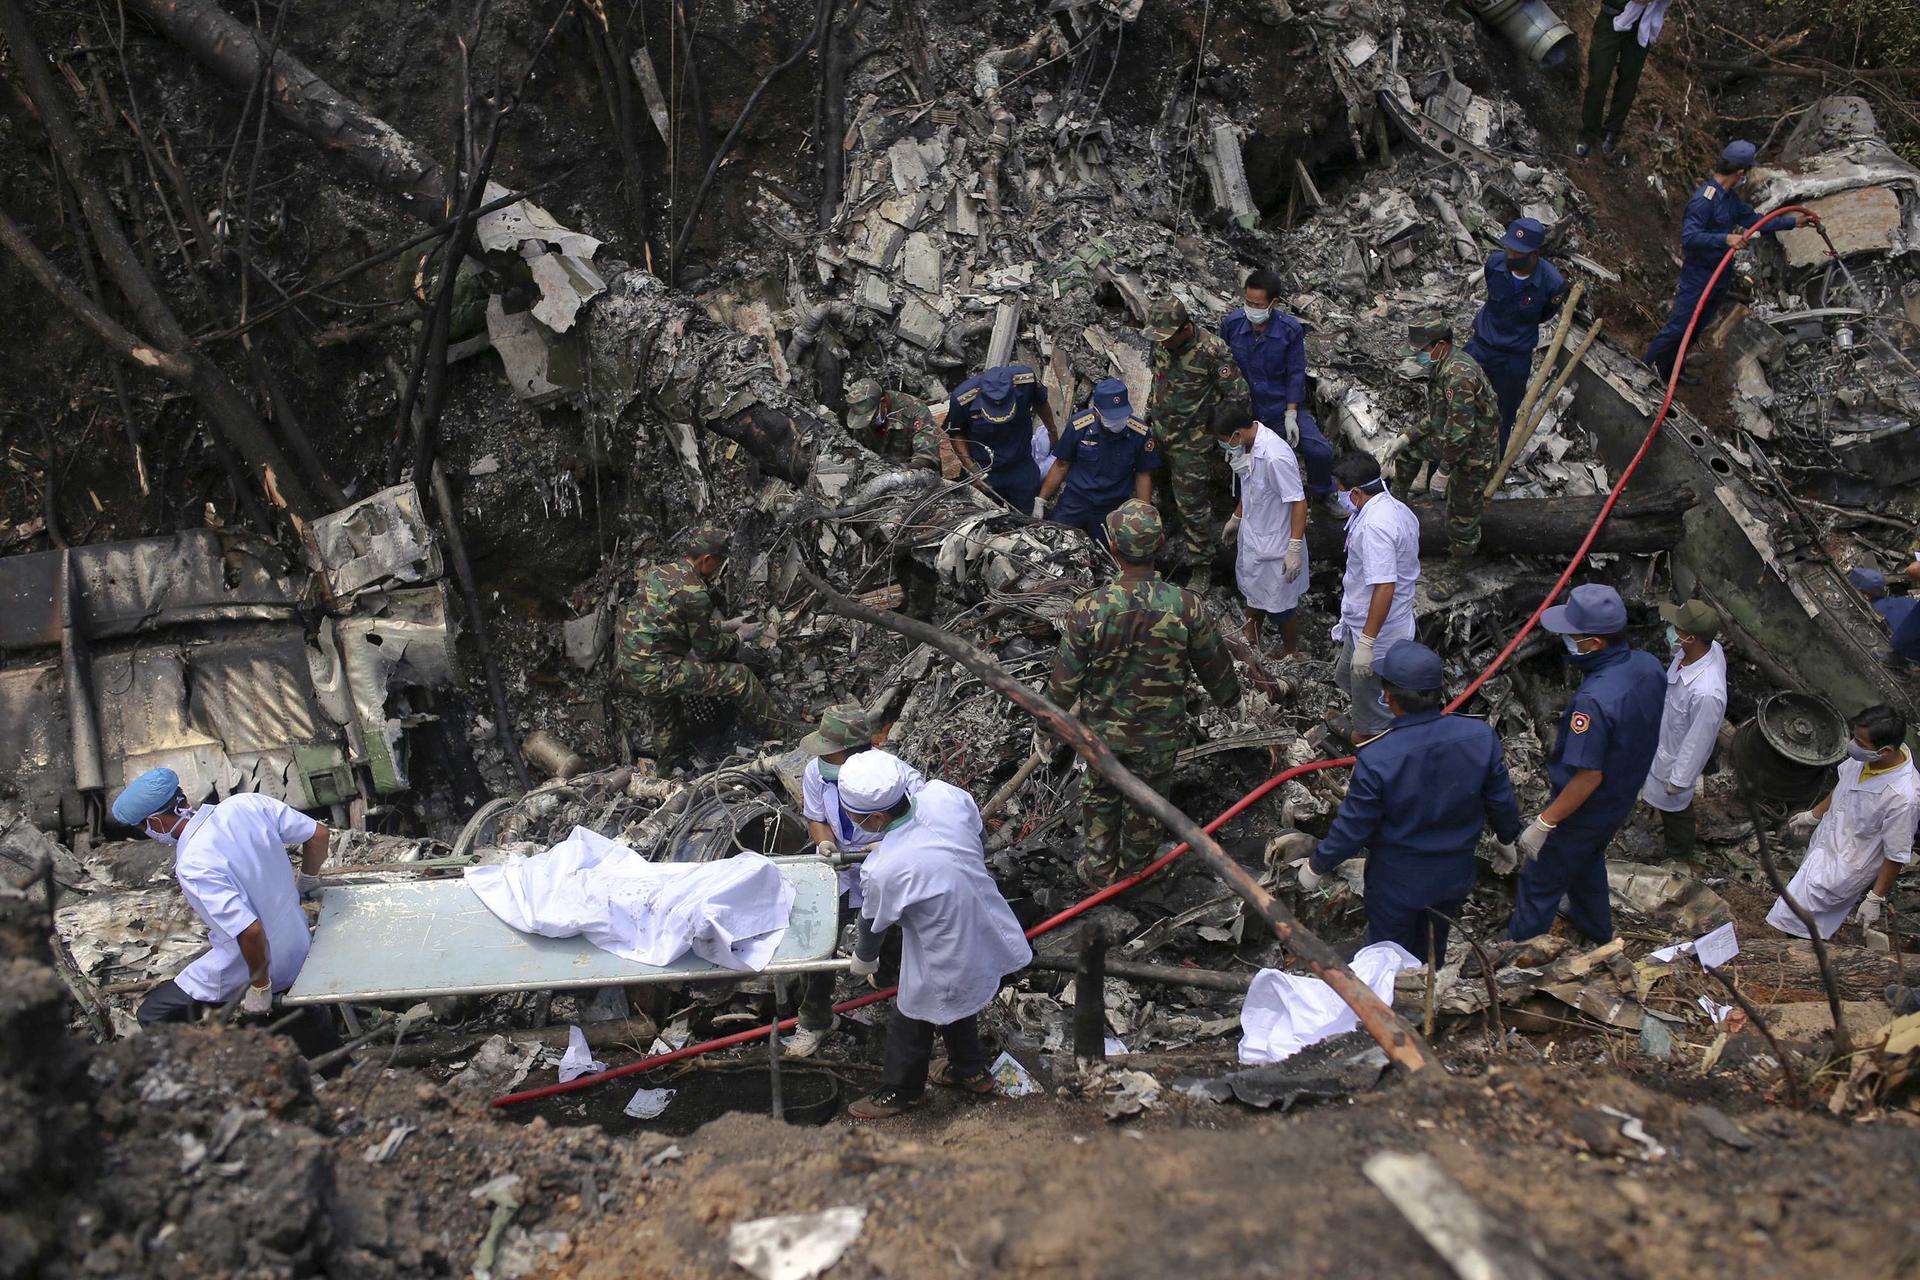 Rescue workers search the site near Nadee village, in Xiangkhouang province, where a Laotian air force plane crashed. Photo: Reuters